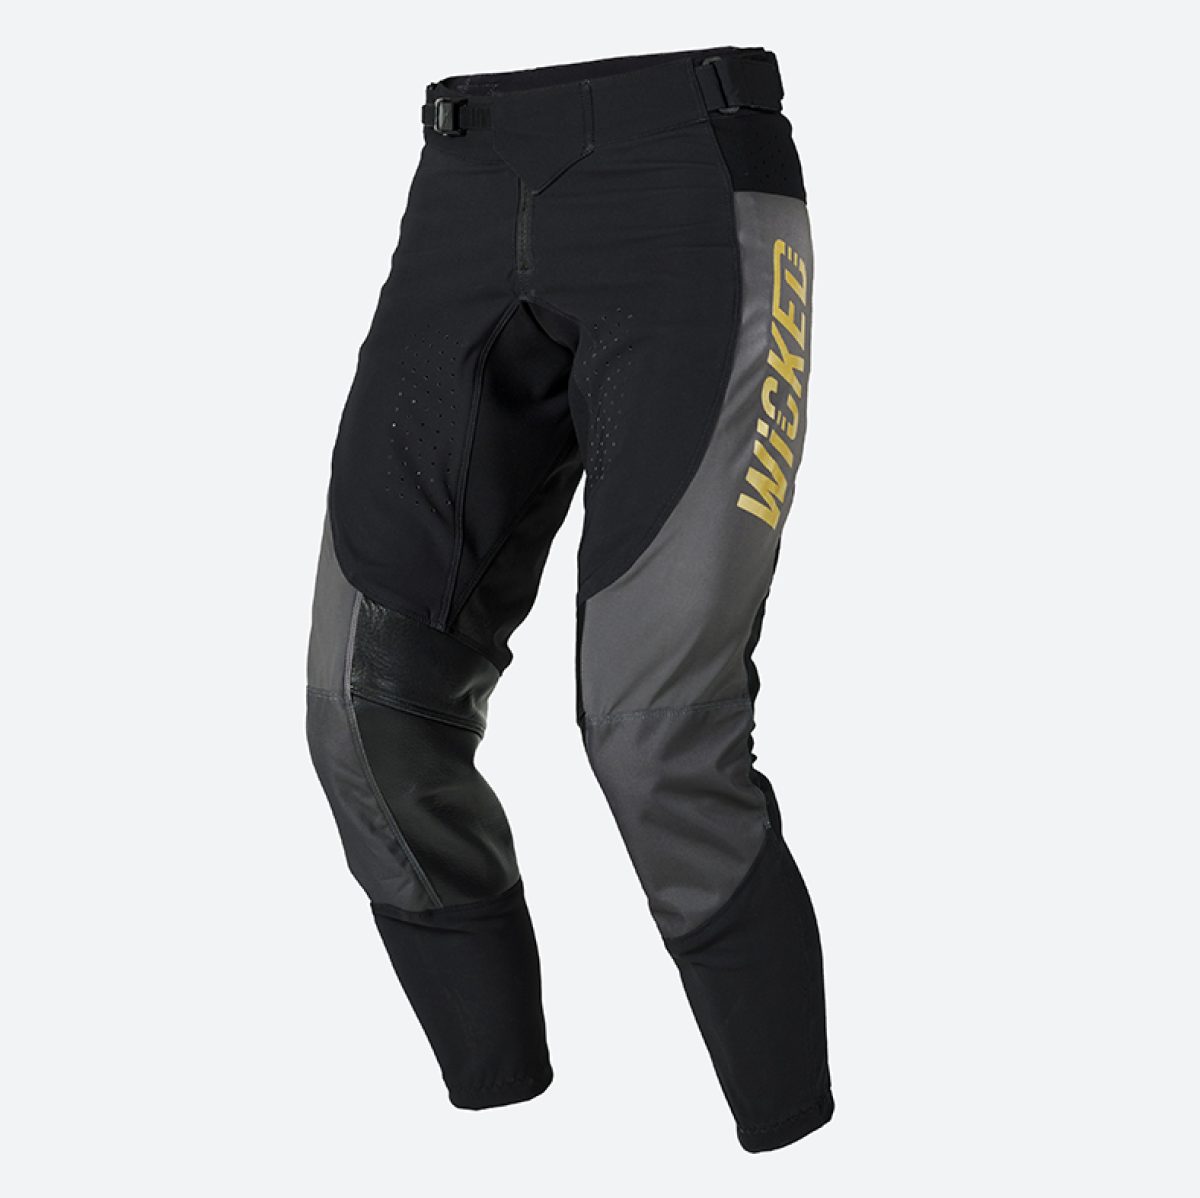 Moxie's New Wicked Girl G-Form Trail Pants have Built-in Knee Pads -  Bikerumor